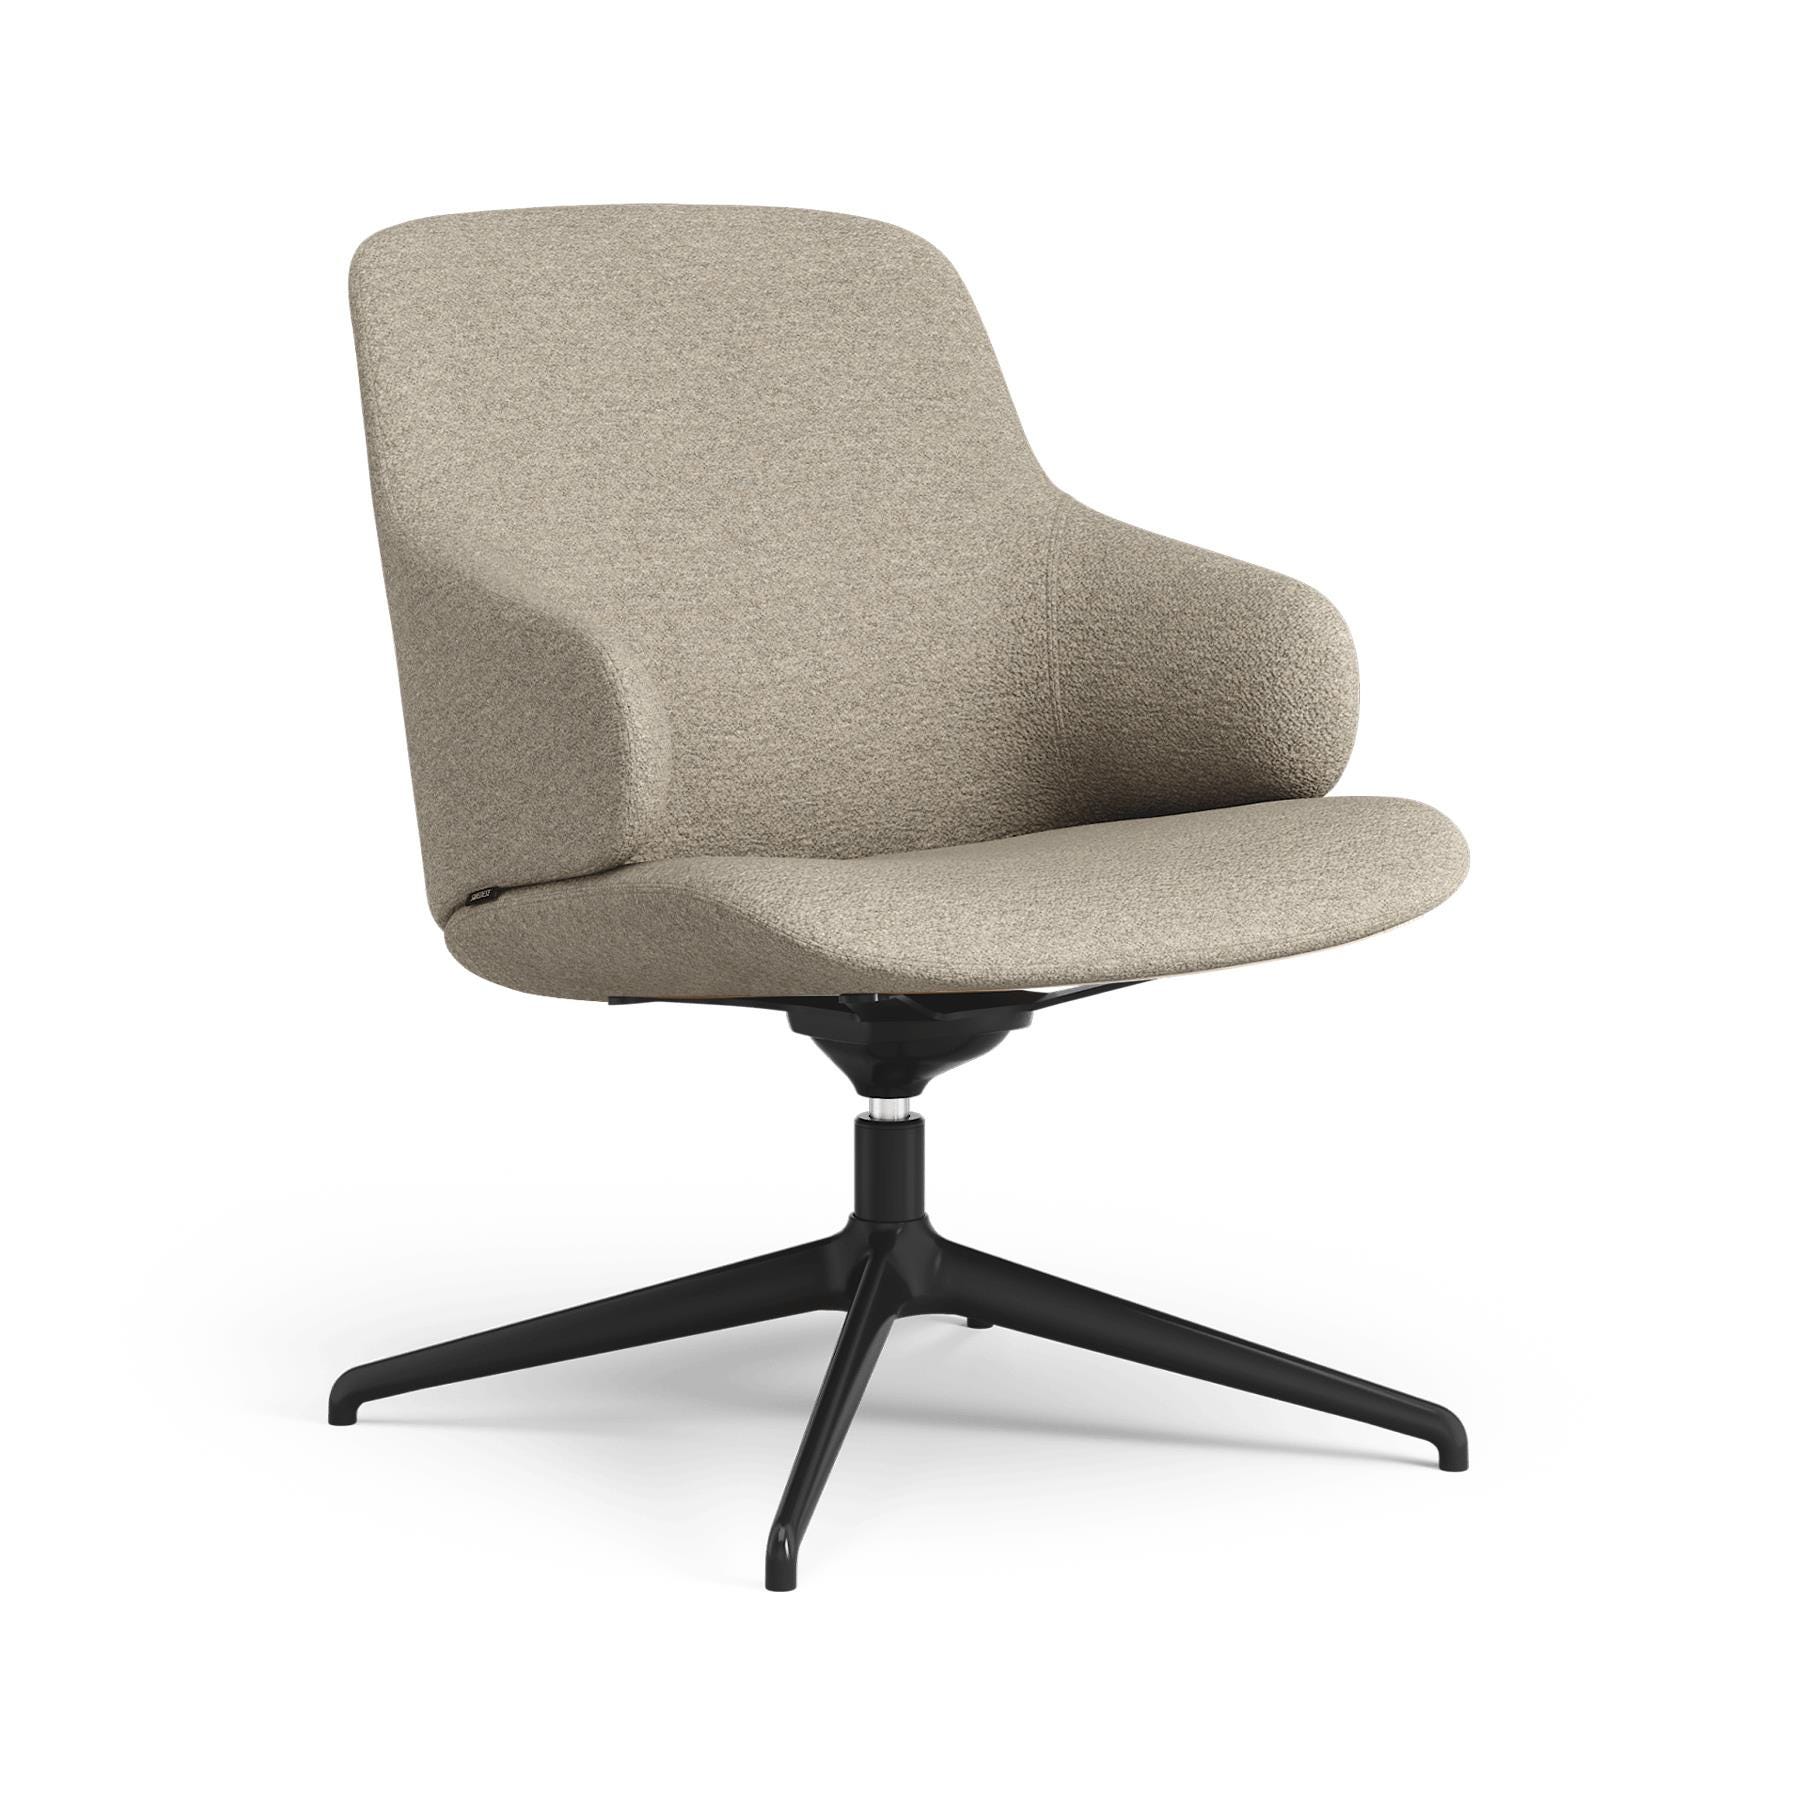 Swedese Amstelle Easy Chair Swivel Black Laquered Aluminium Barnum 02 Brown Designer Furniture From Holloways Of Ludlow